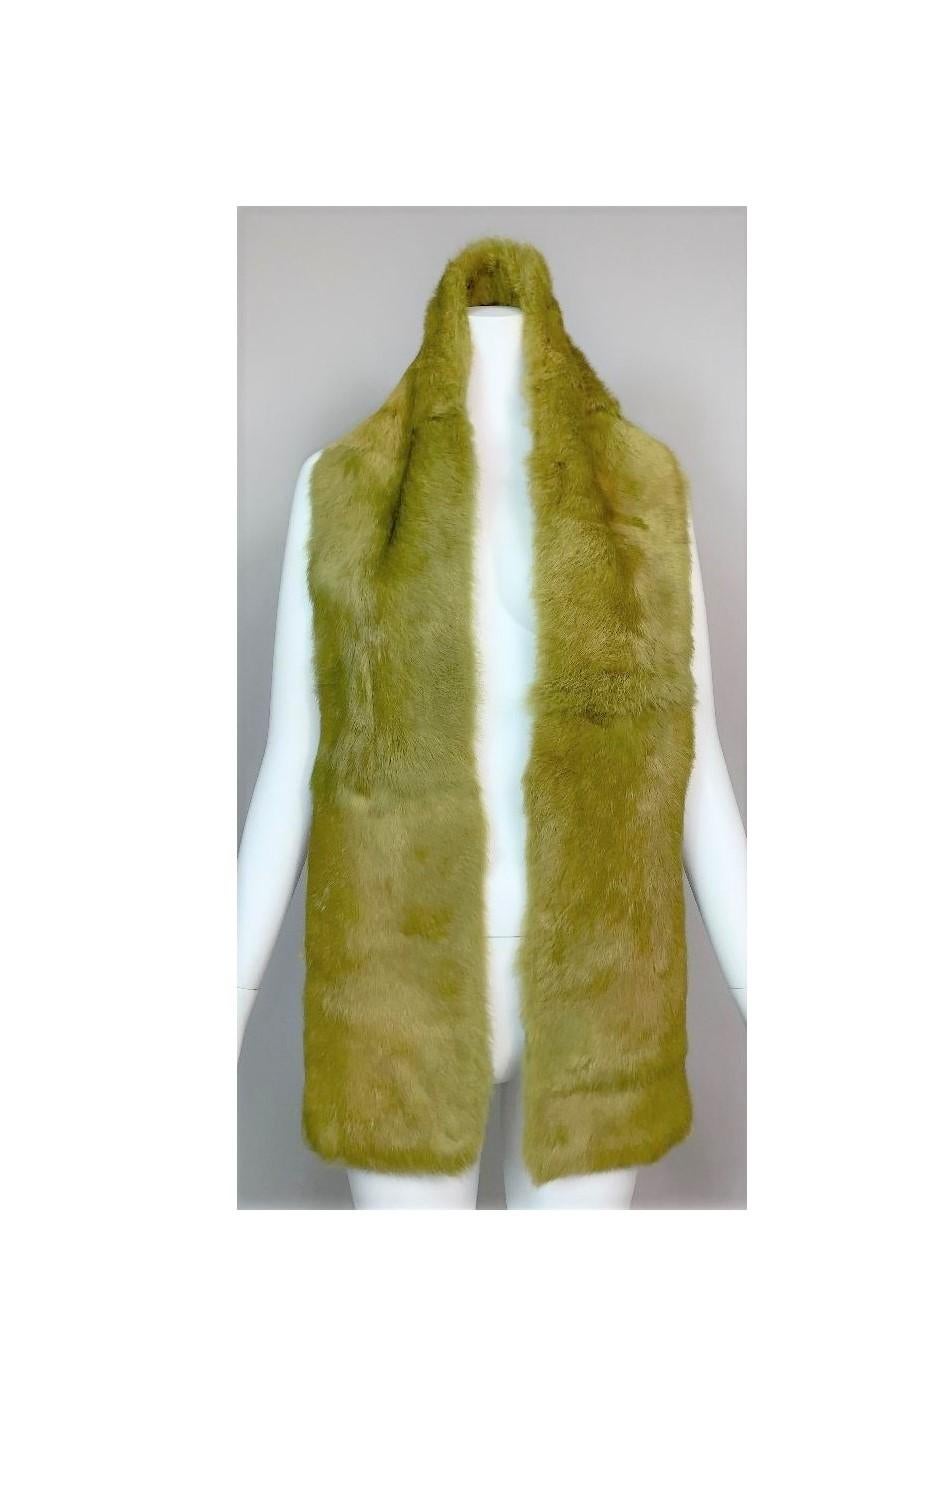 DESIGNER: F/W 2000 Christian Dior by John Galliano

Please contact us for more images or information

CONDITION: Good- flaw shown in last photo

FABRIC: Fur- we believe it is mink but there is no fabric tag

COUNTRY: France

SIZE: